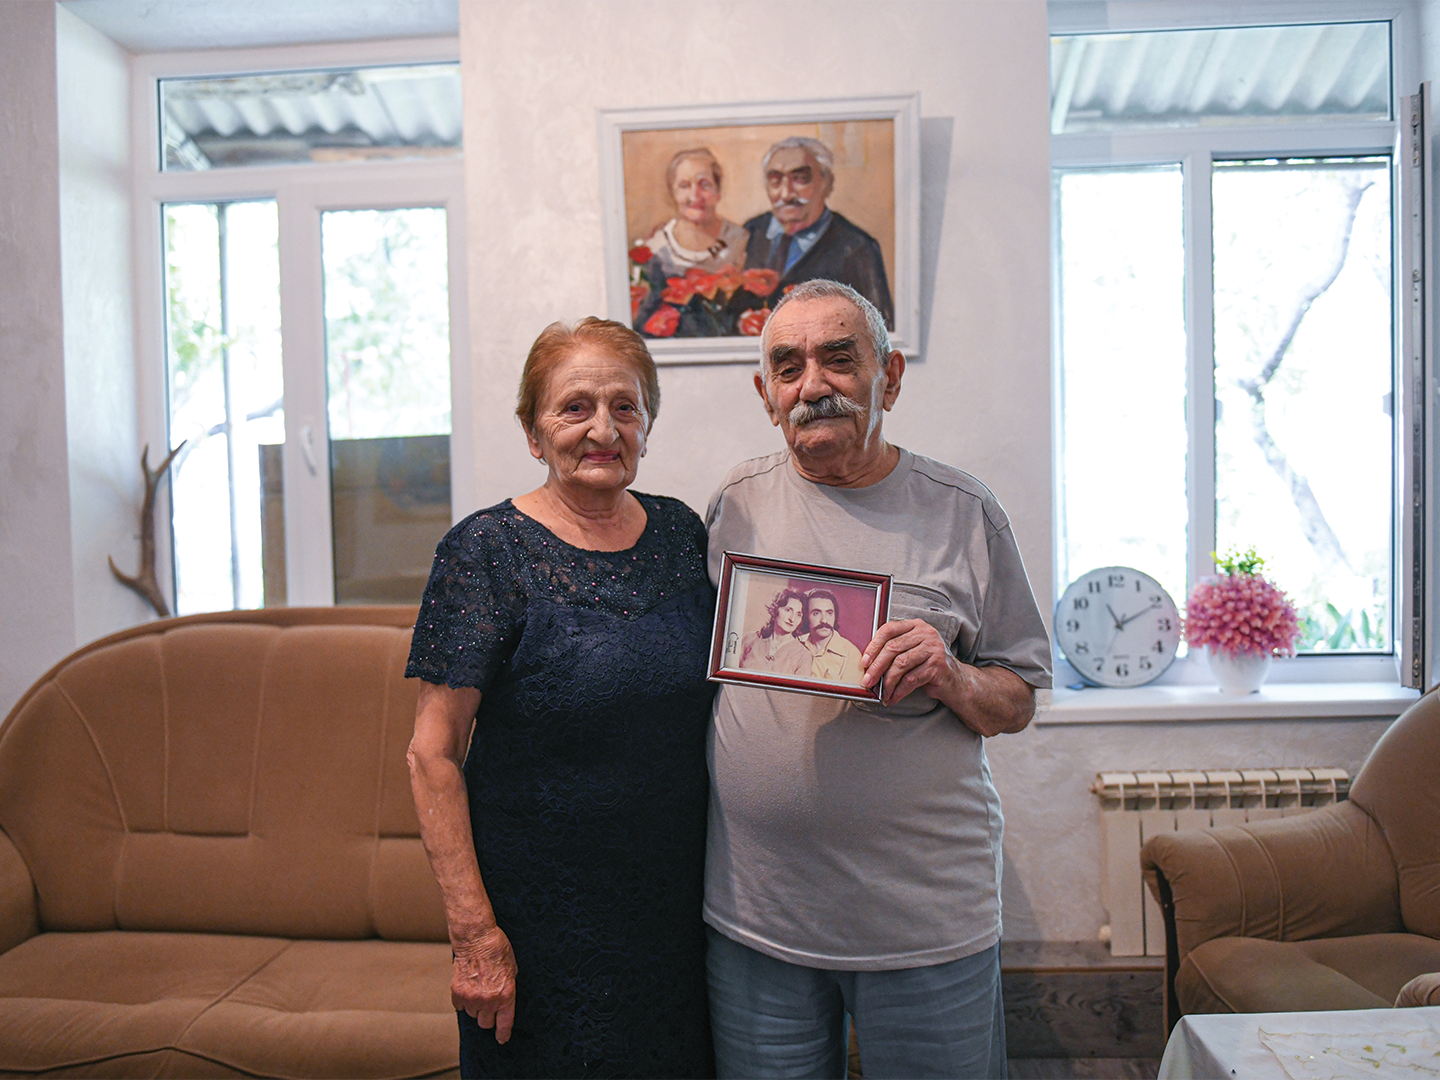 Founders of the Narek Nursing Home, Shoghik and Fridon Mikaeyelian are a happily married couple of over 50 years.